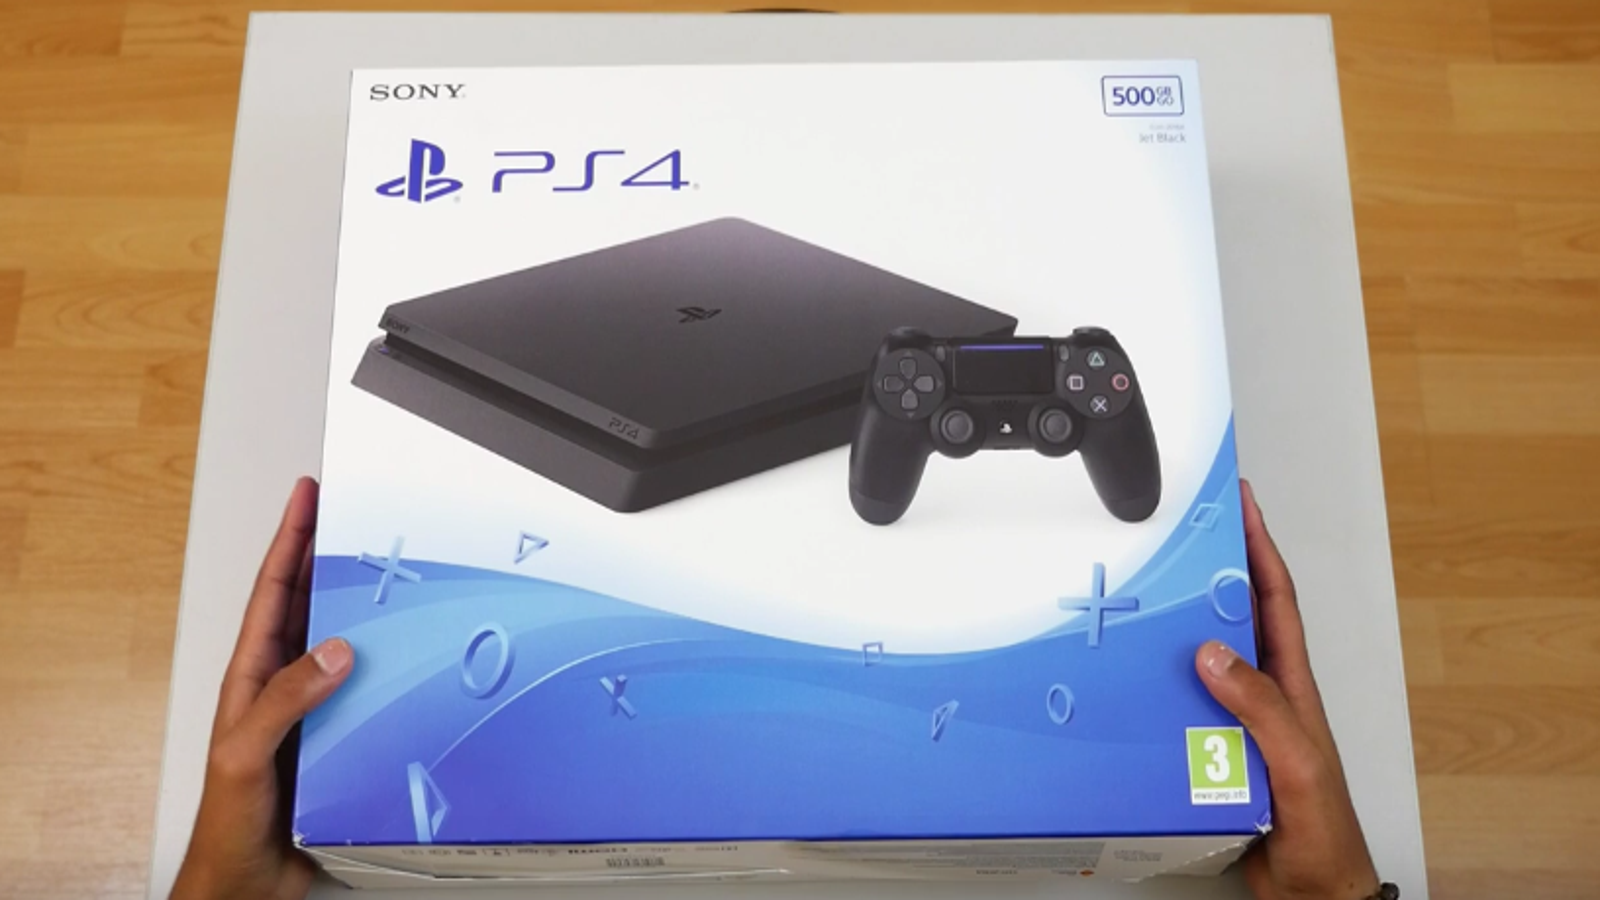 PS4 Slim - take a closer look at the console and the new DualShock 4  controller